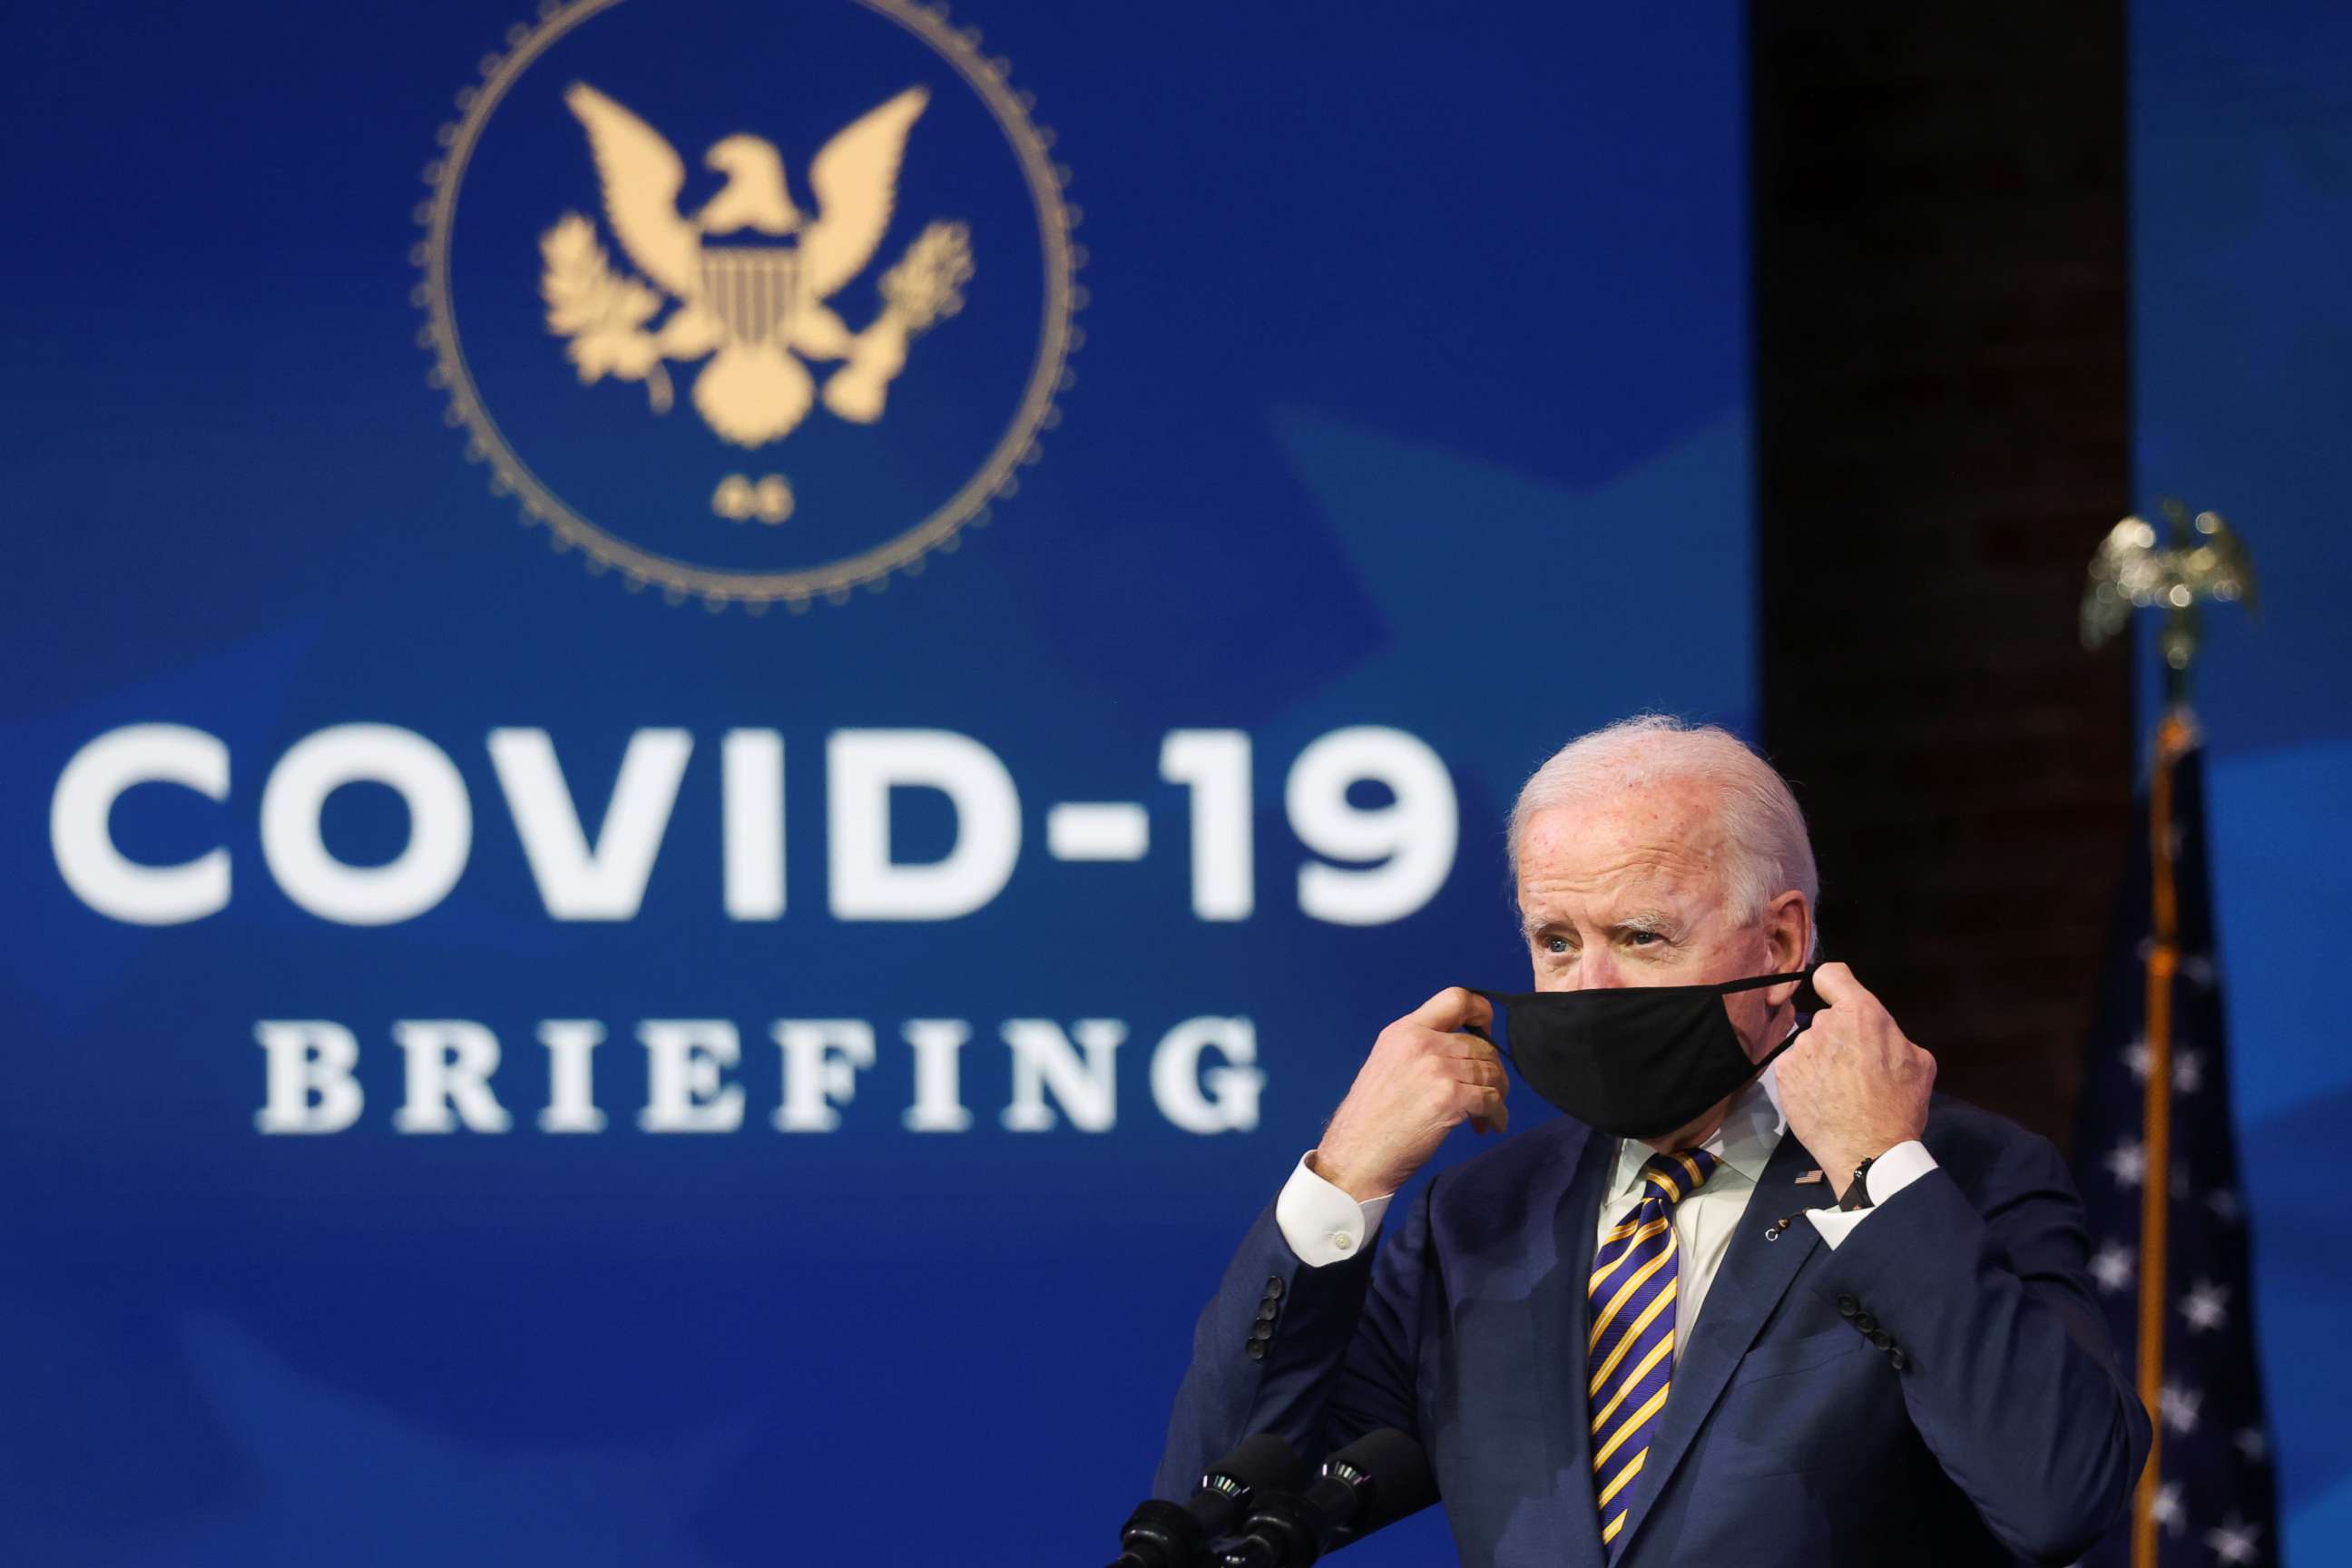 PHOTO: President-elect Joe Biden takes off his face mask to deliver remarks on the country's response to the coronavirus disease outbreak, at his transition headquarters in Wilmington, Del., Dec. 29, 2020.